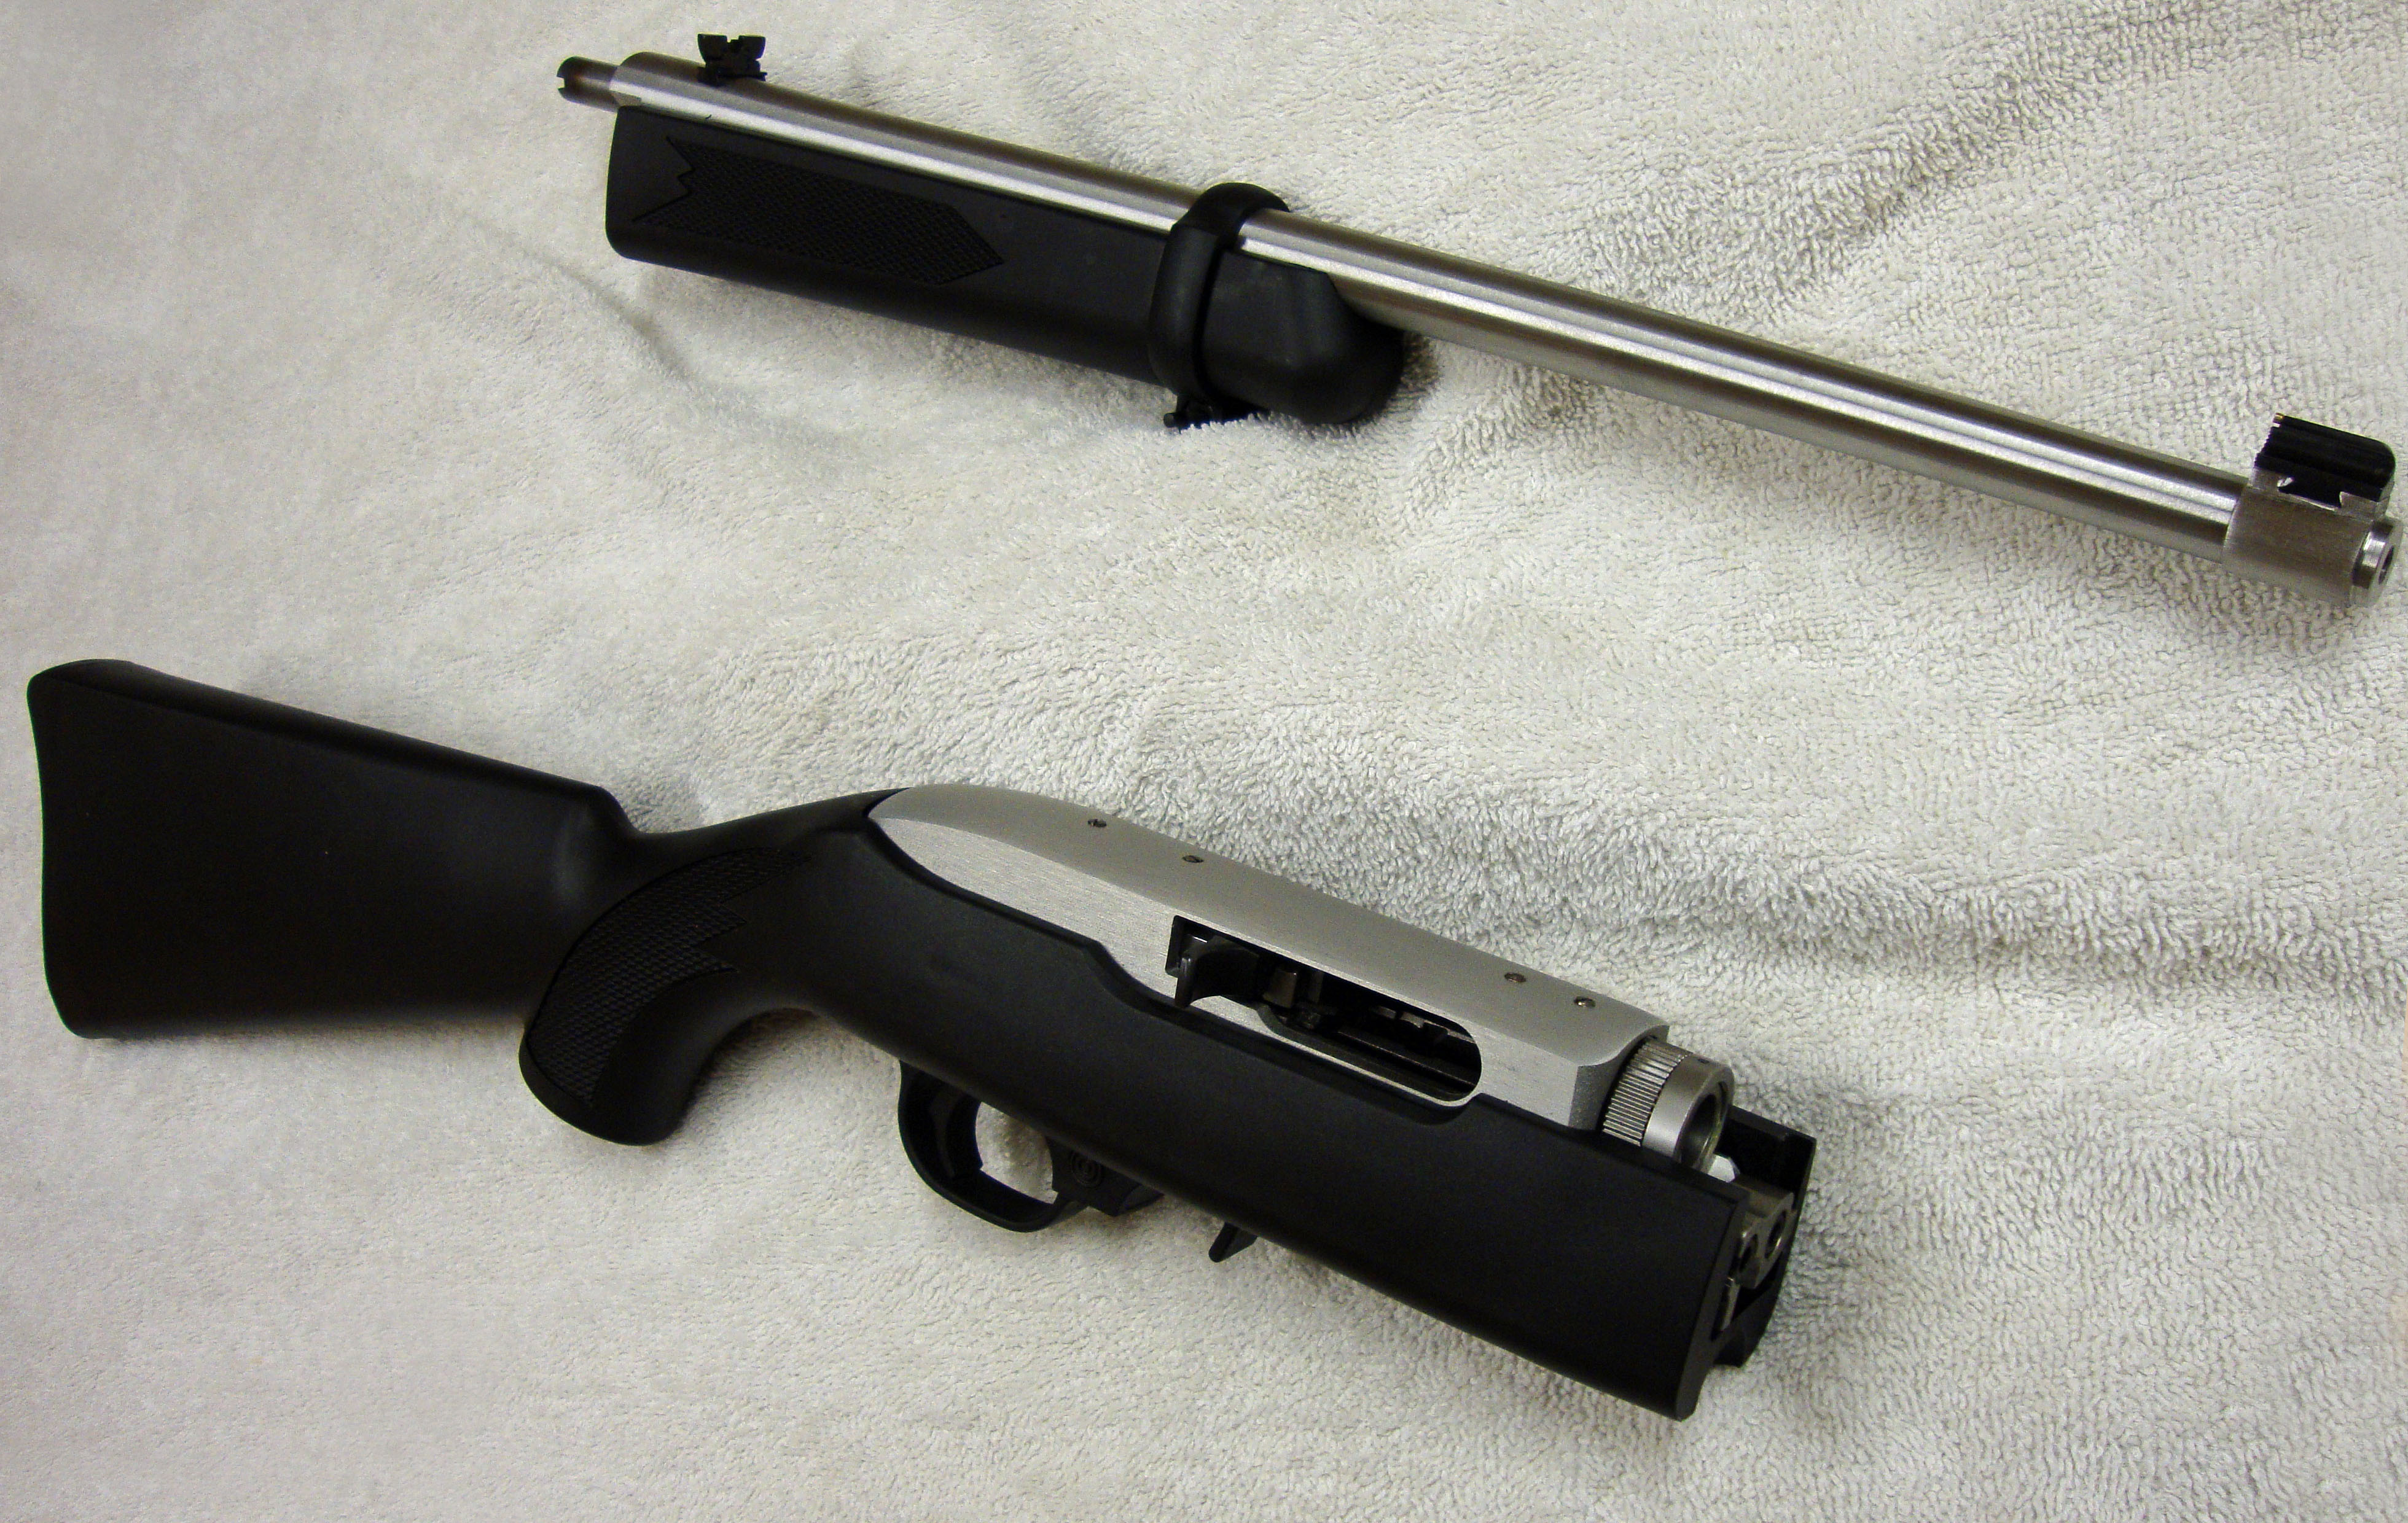 Ruger 10/22 Take Down Rifle